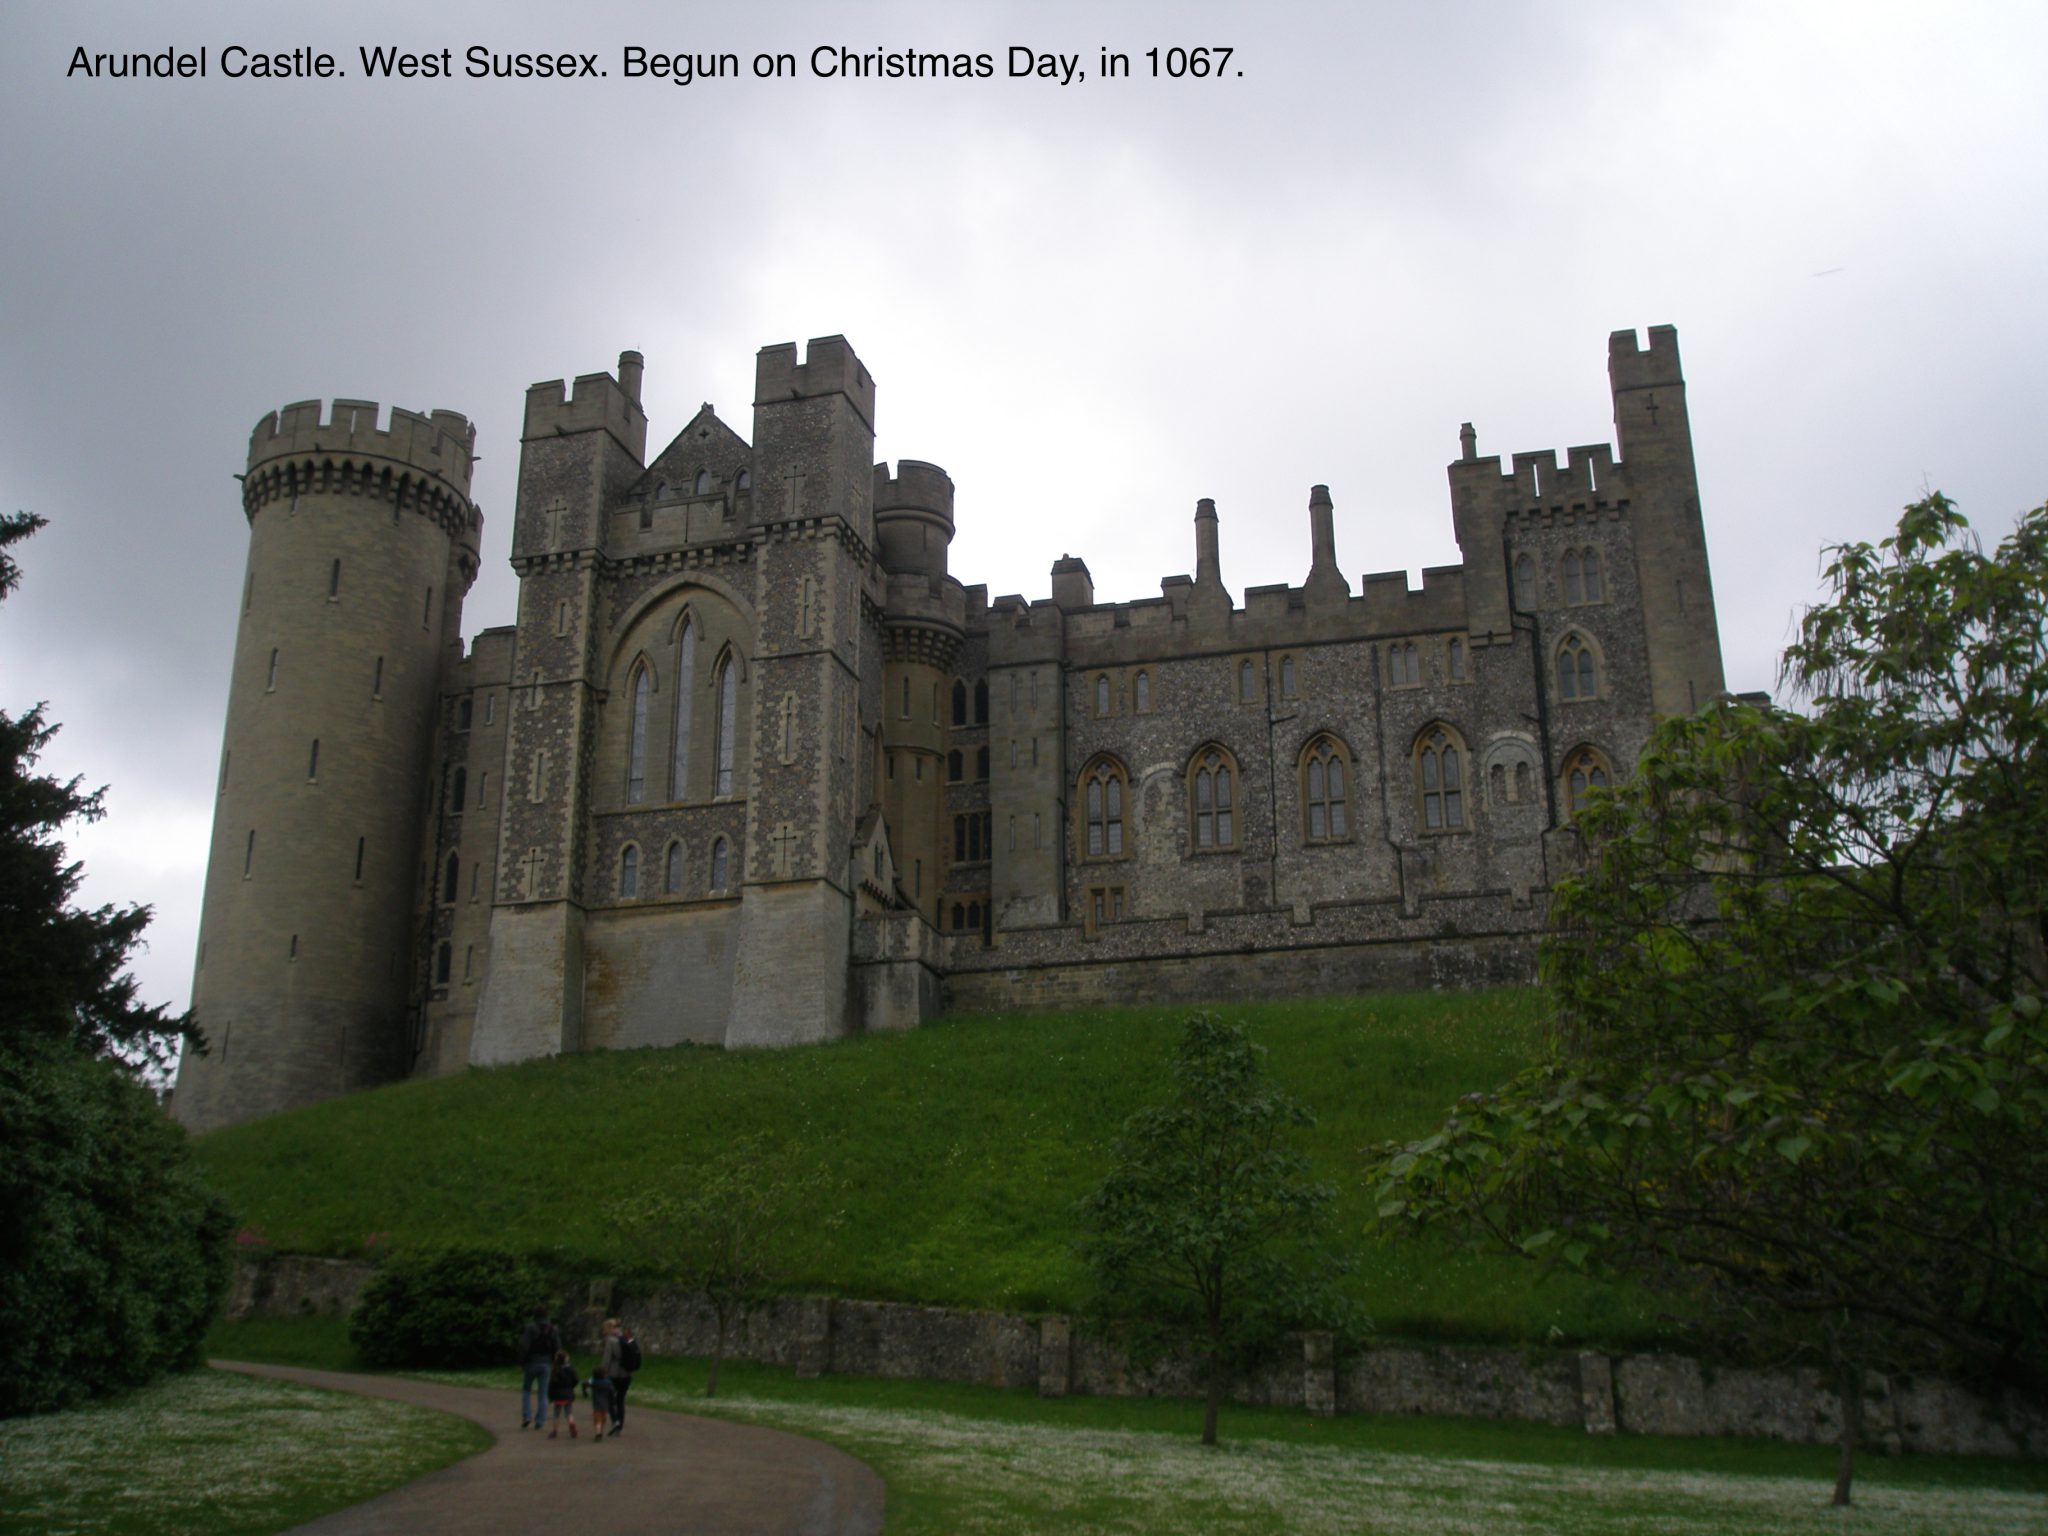 I approached Arundel Castle, on a stormy day in May of 2014.